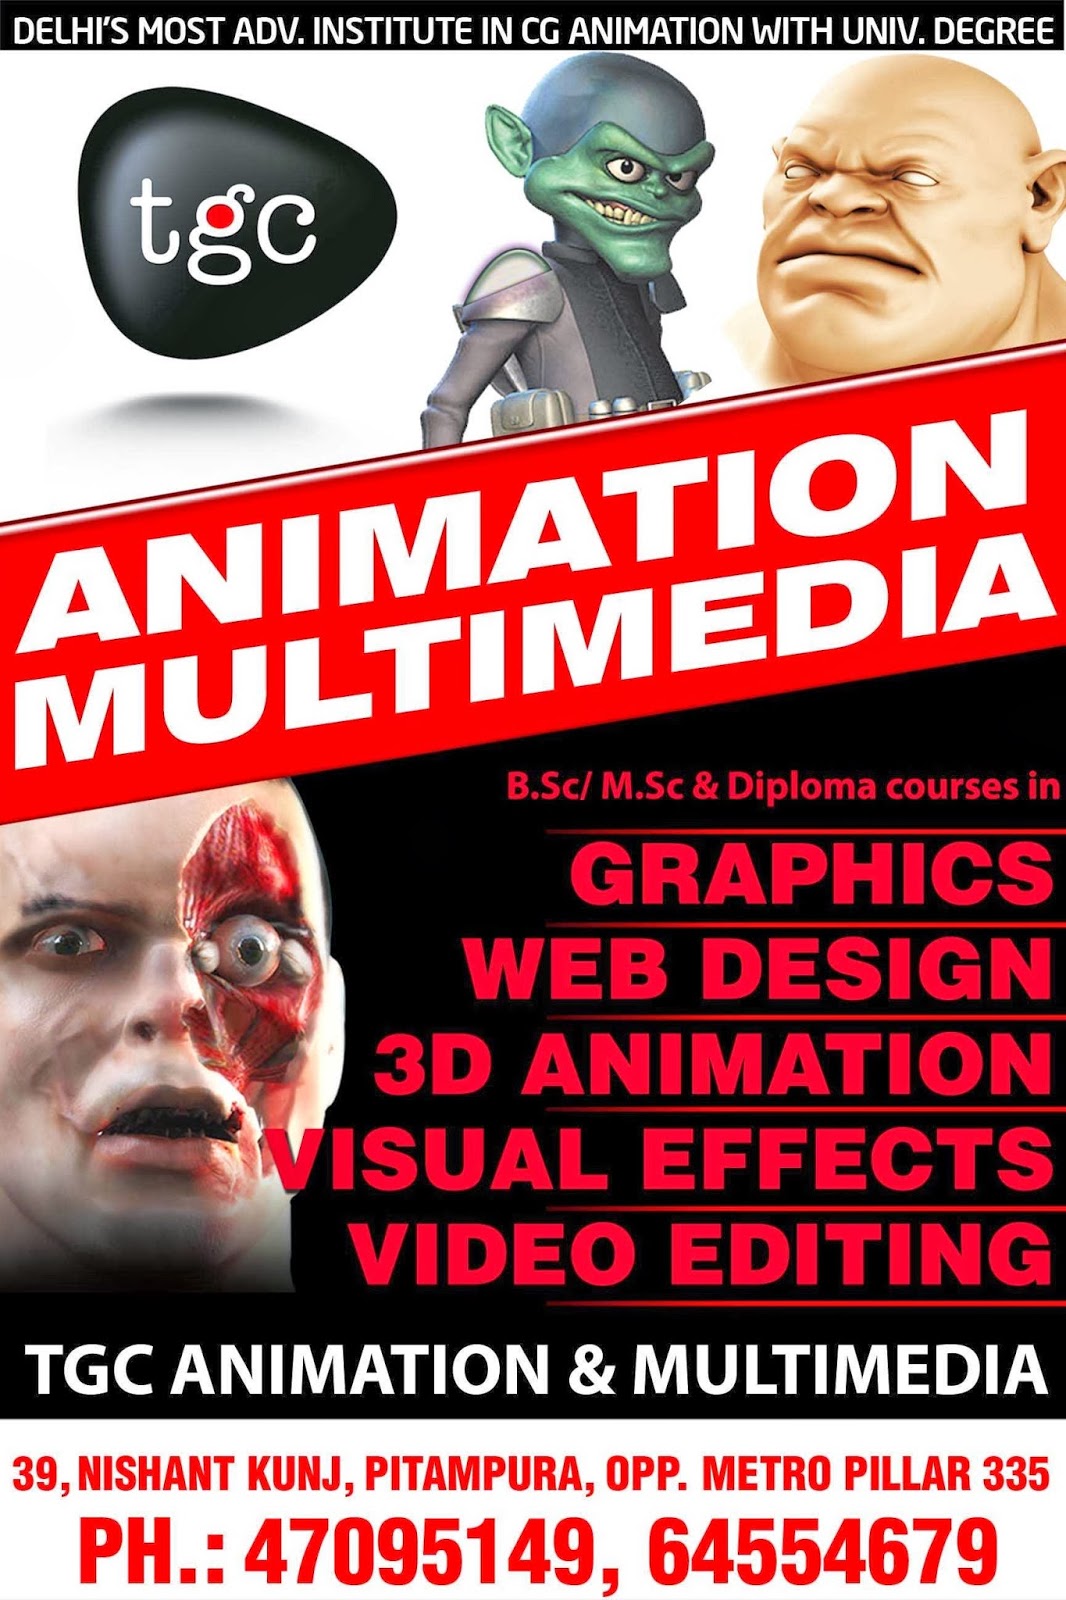 Tgc Animation and Multimedai - Rohini, Delhi - Reviews, Fee Structure,  Admission Form, Address, Contact, Rating - Directory